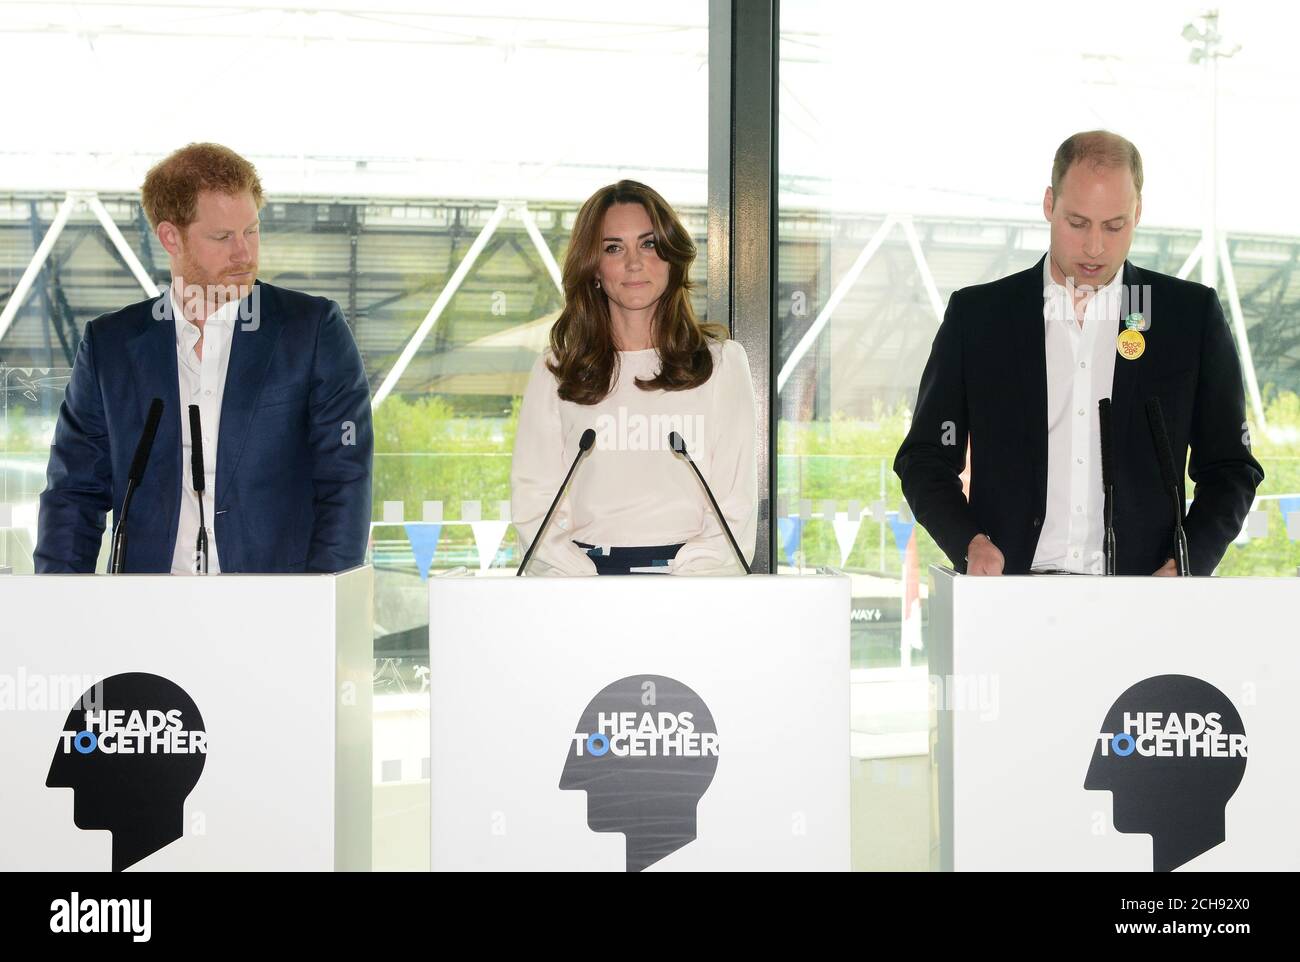 (left to right) Prince Harry, the Duchess and the Duke of Cambridge speak at the Queen Elizabeth Olympic Park in east London where they are launching Heads Together - their new campaign to end mental health stigma. Stock Photo